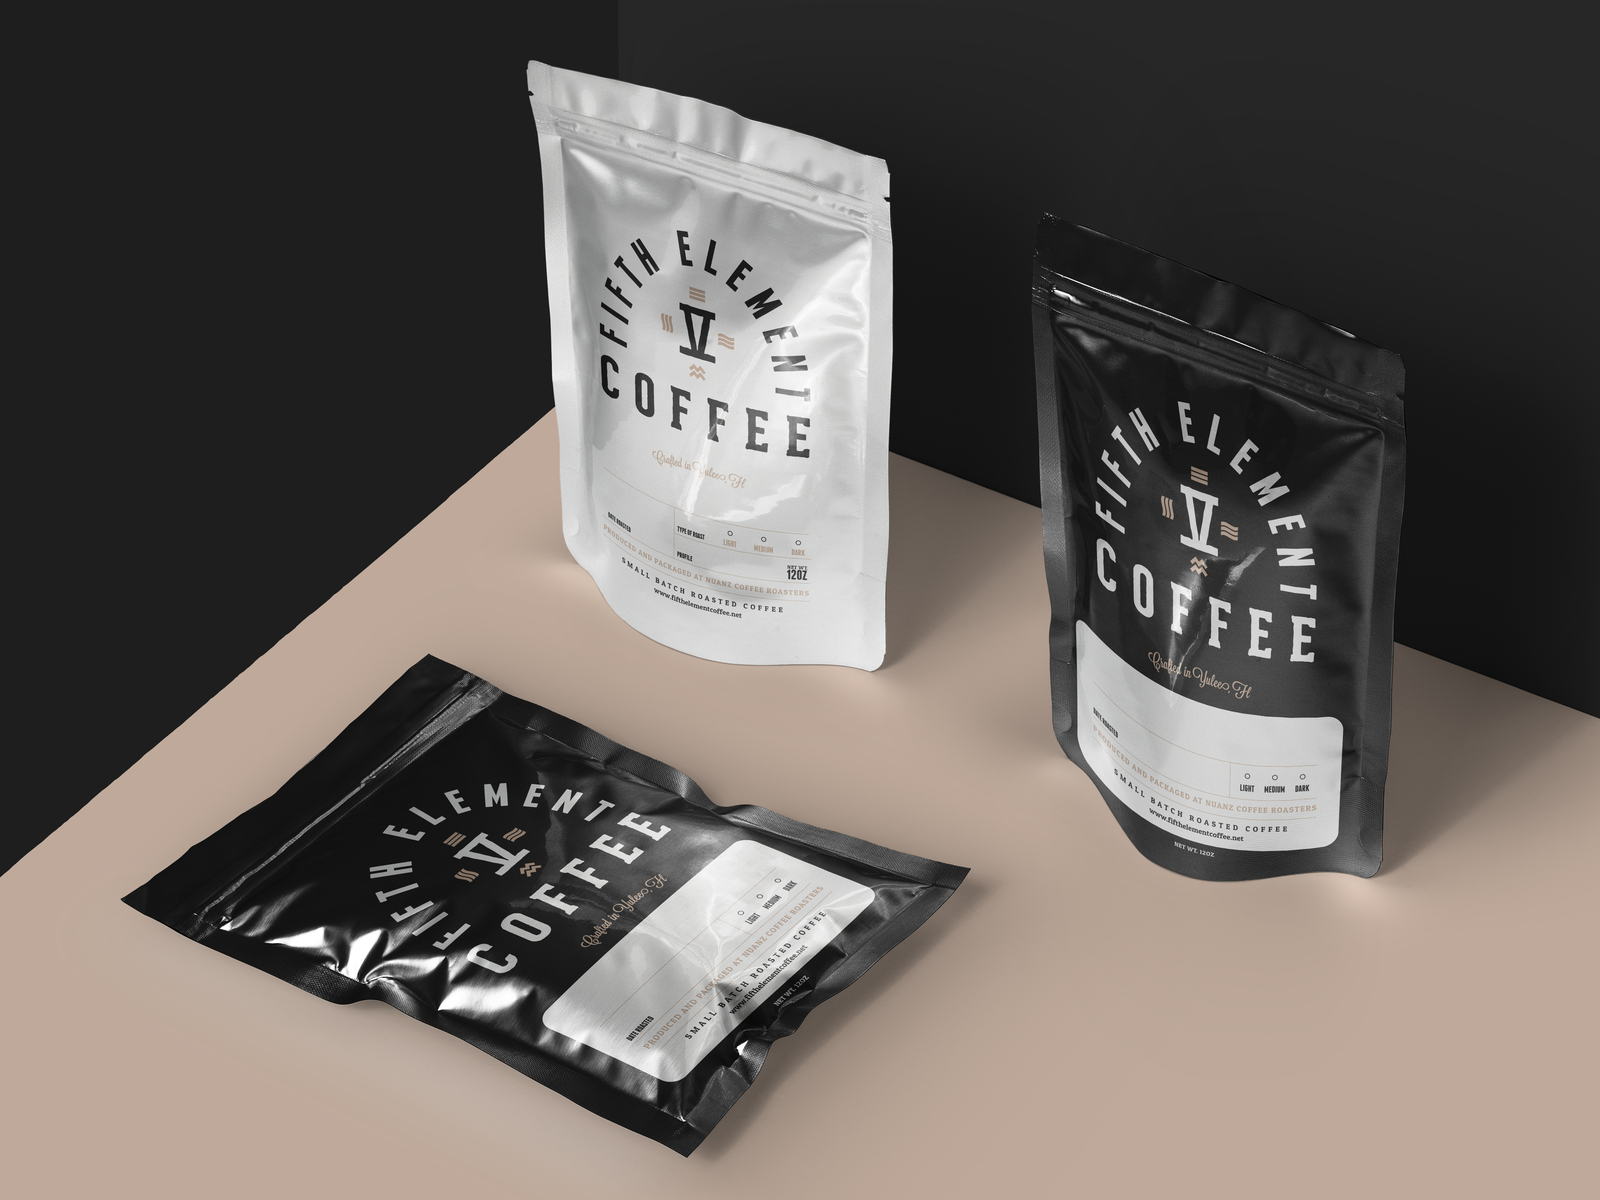 Fifth Element Roasted Coffee Bags by Sam Jones on Dribbble